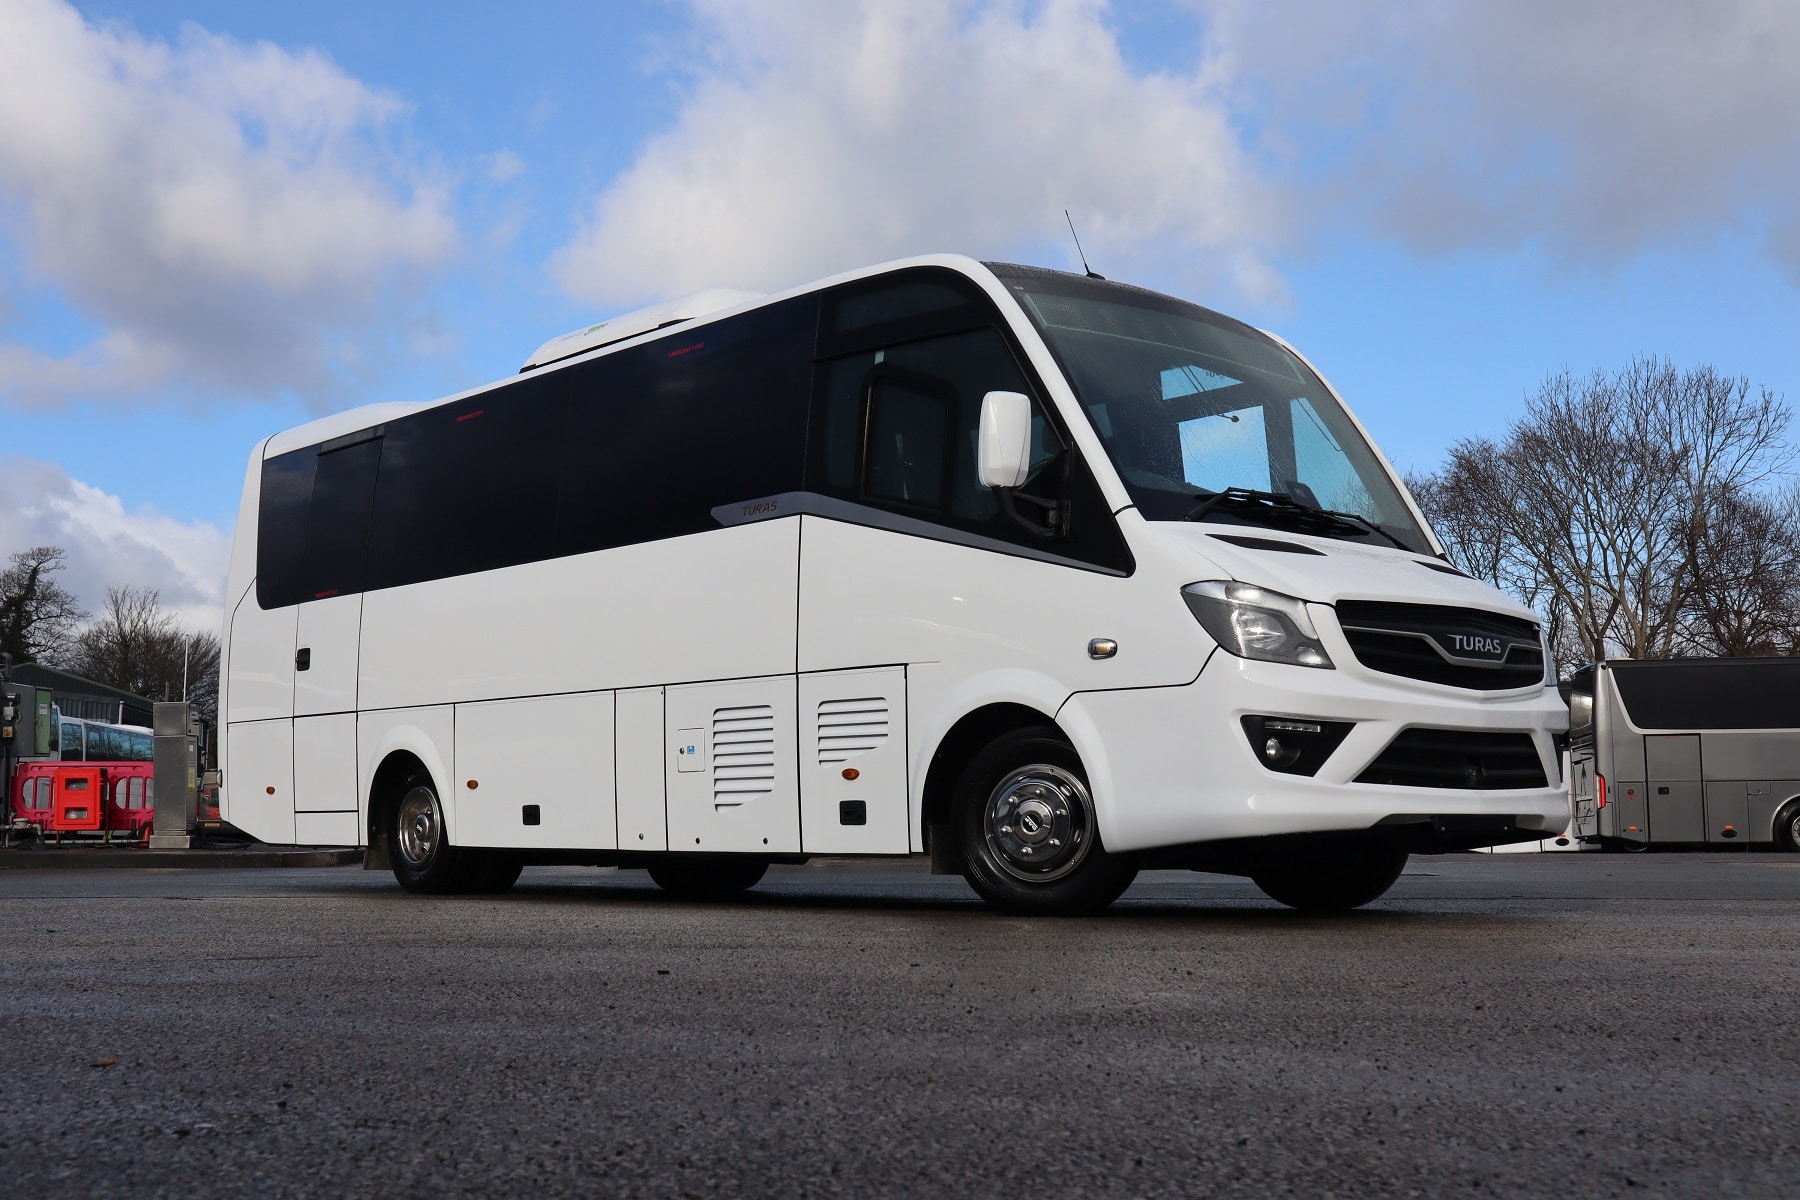 Jones Coach and Bus Sales with Turas 900s midicoach